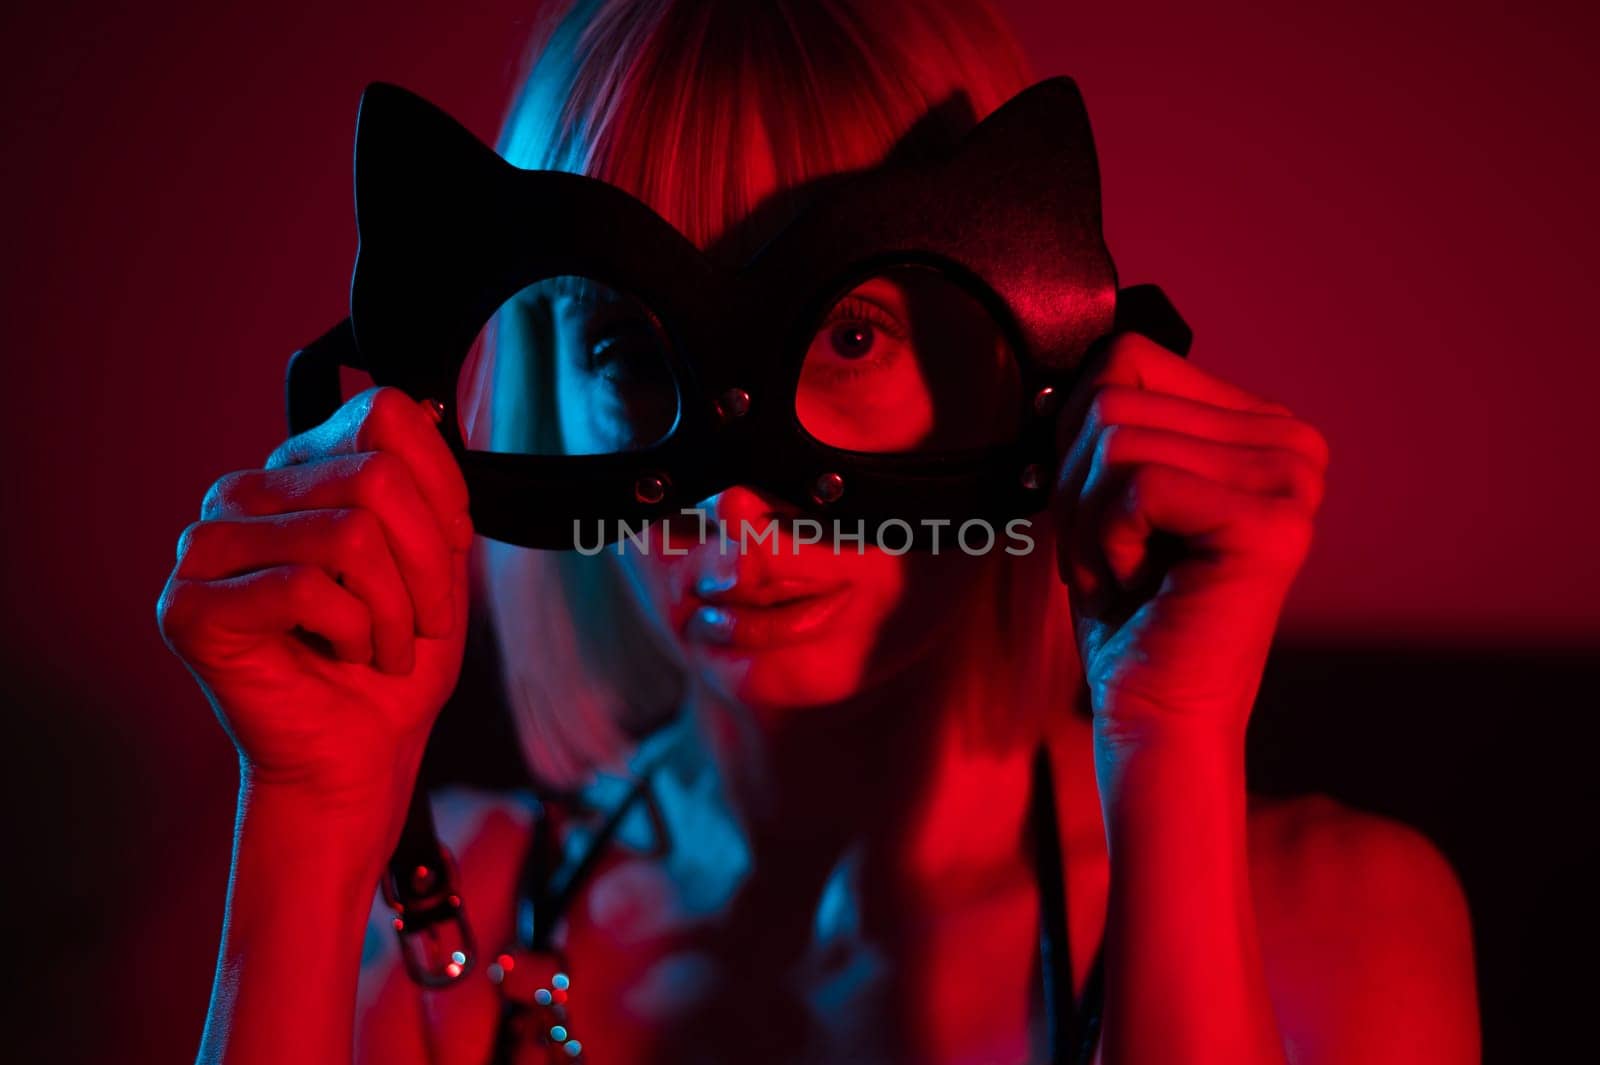 Blonde woman putting on leather mask in bedroom in red blue neon light. by mrwed54